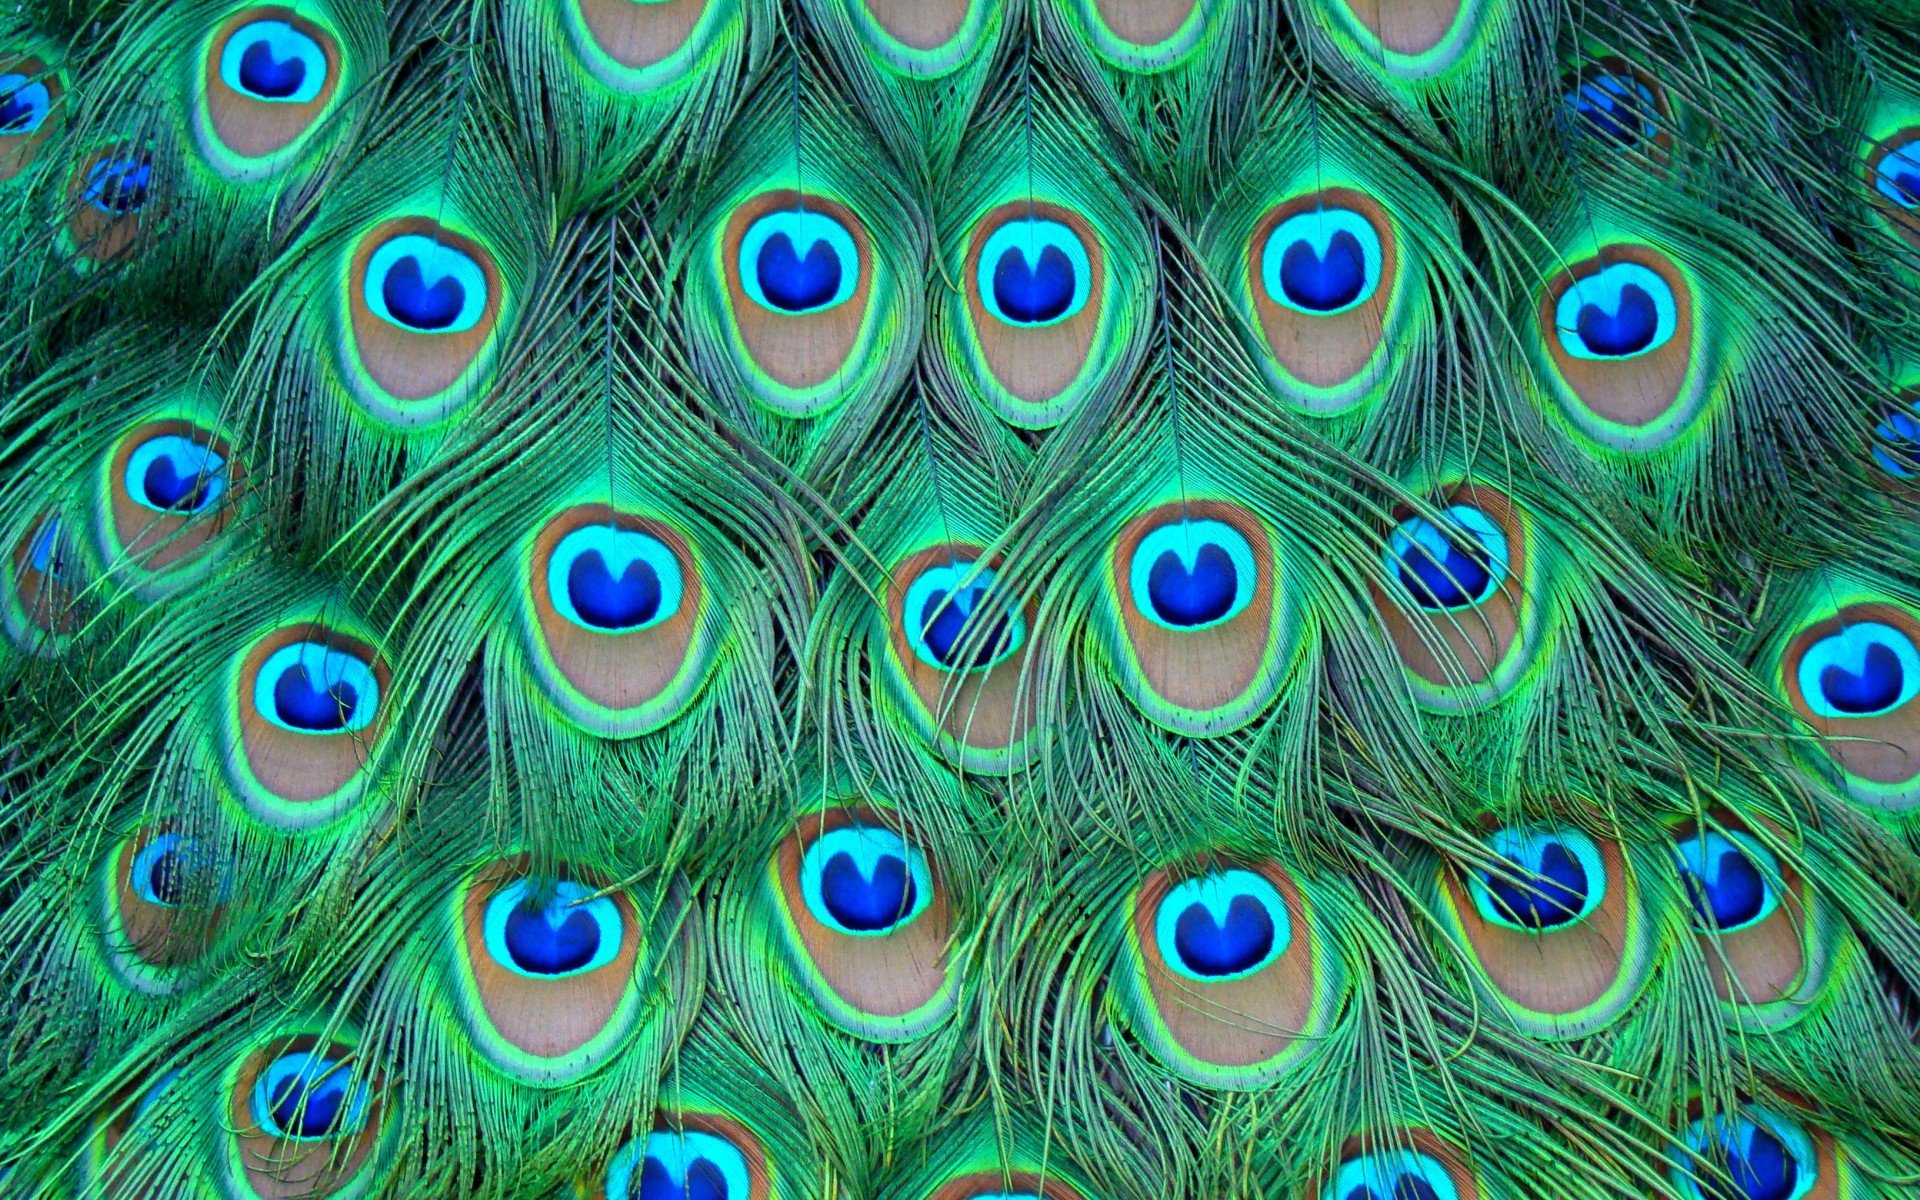 Superb Teal Wallpaper Peacock Image Feathers Picture